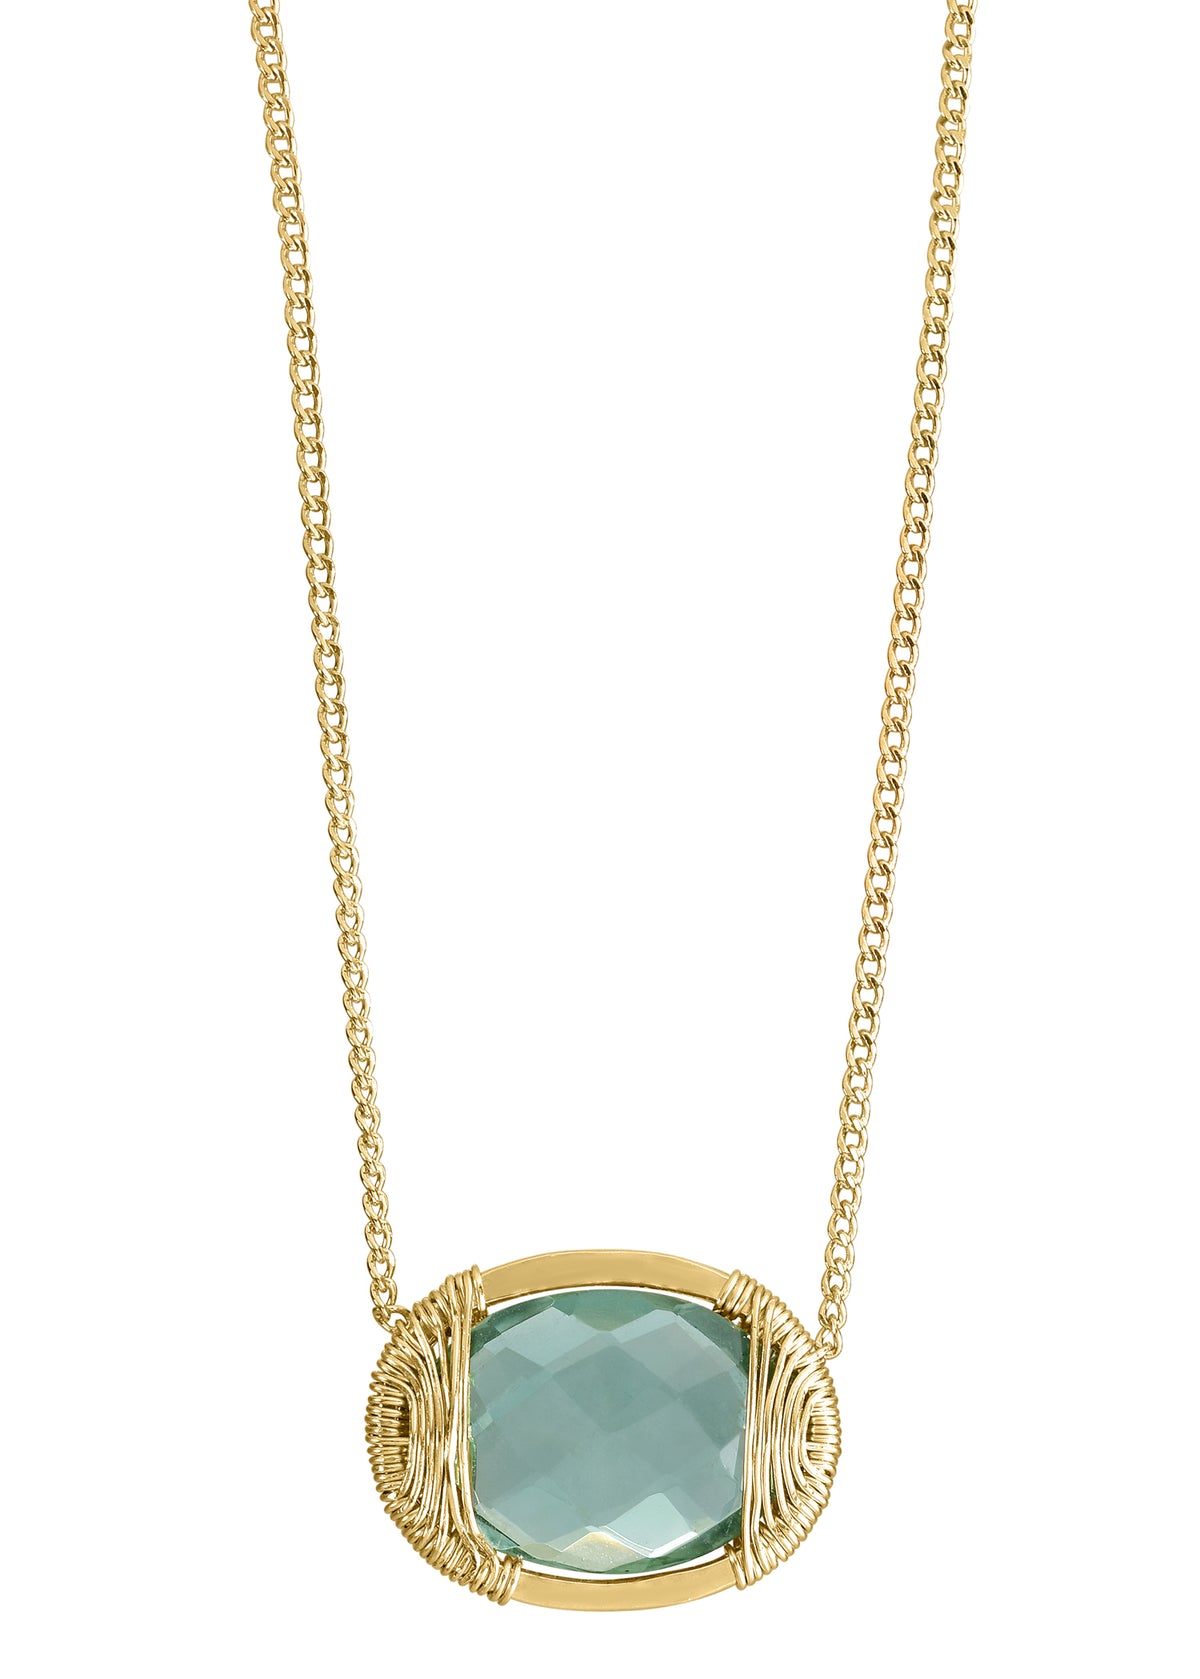 Green quartz 14k gold fill Necklace measures 16&quot; in length Pendant measures 7/16&quot; in length and 5/8&quot; in width Handmade in our Los Angeles studio